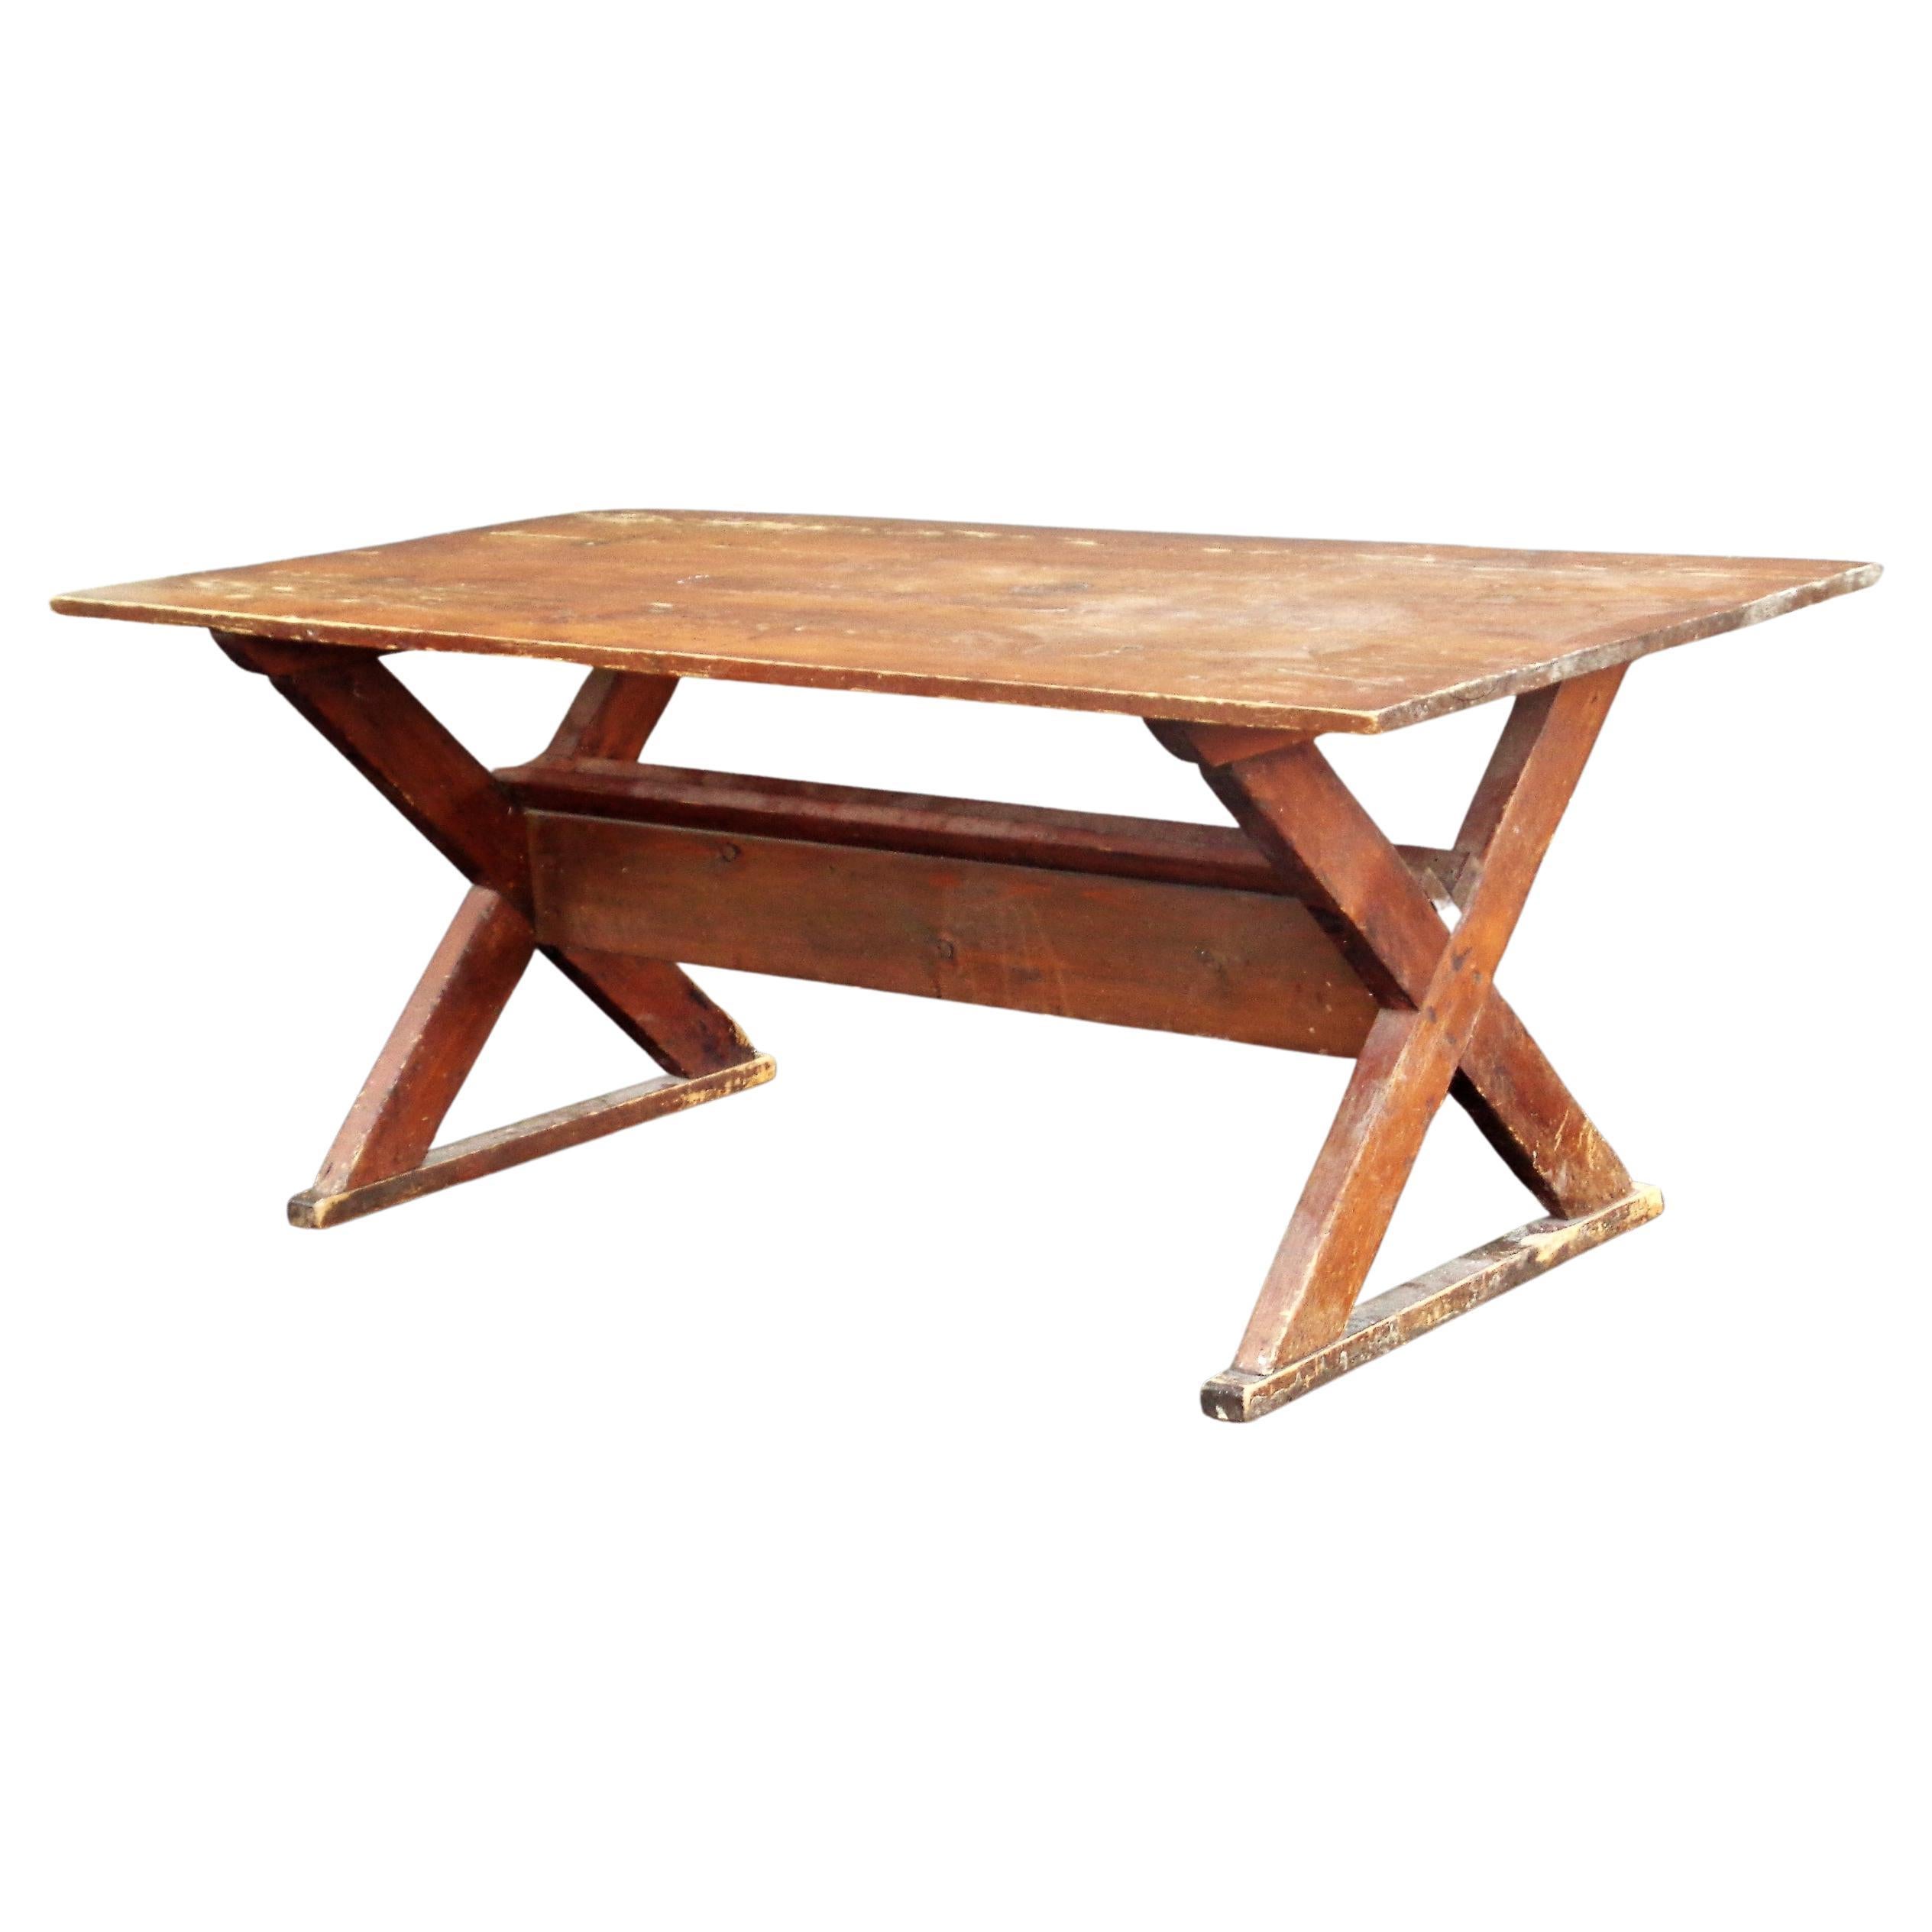  Country Pine Sawbuck Trestle Dining Table, Circa 1940 For Sale